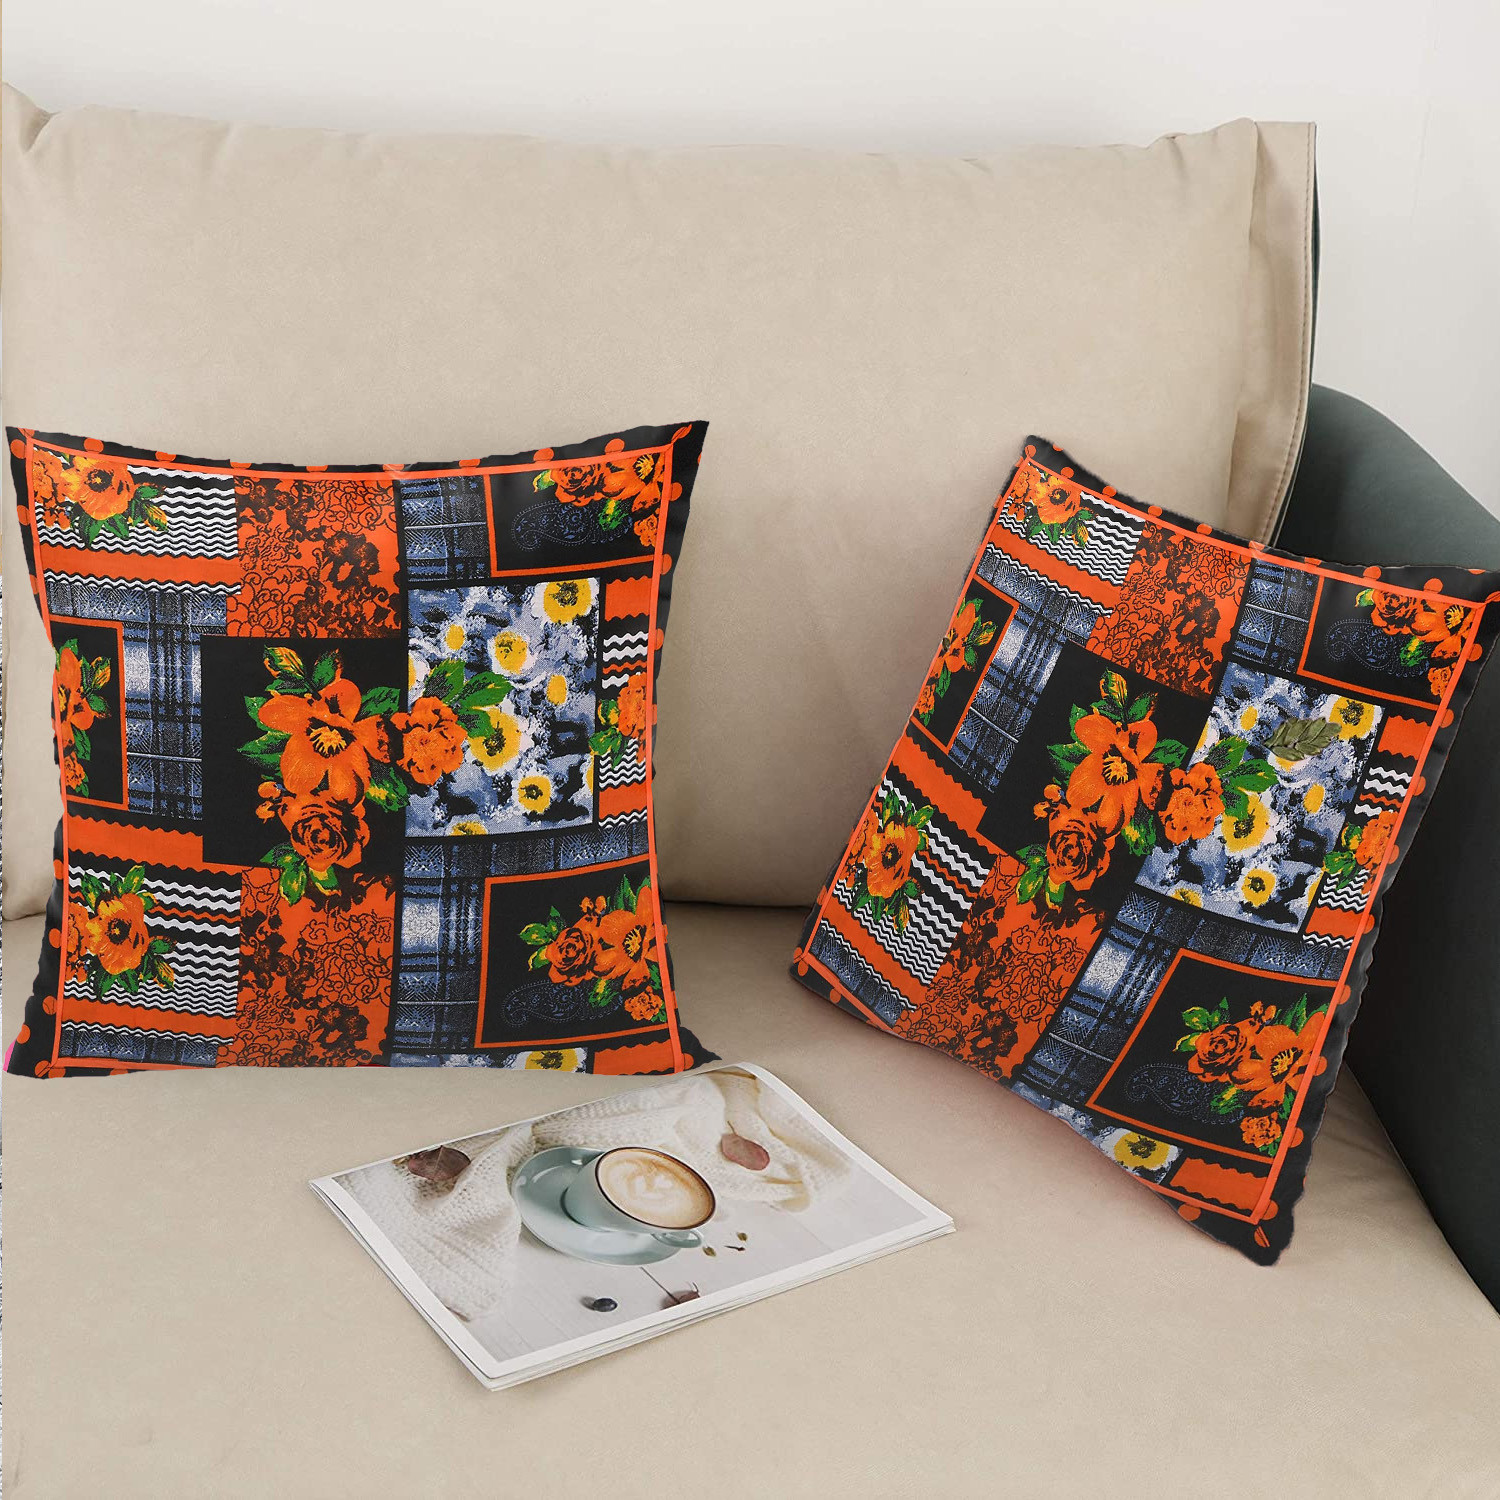 Kuber Industries Cushion Cover|Ractangle Cushion Covers|Sofa Cushion Covers|Cushion Covers 16 inch x 16 inch|Cushion Cover Set of 5 (Orange)